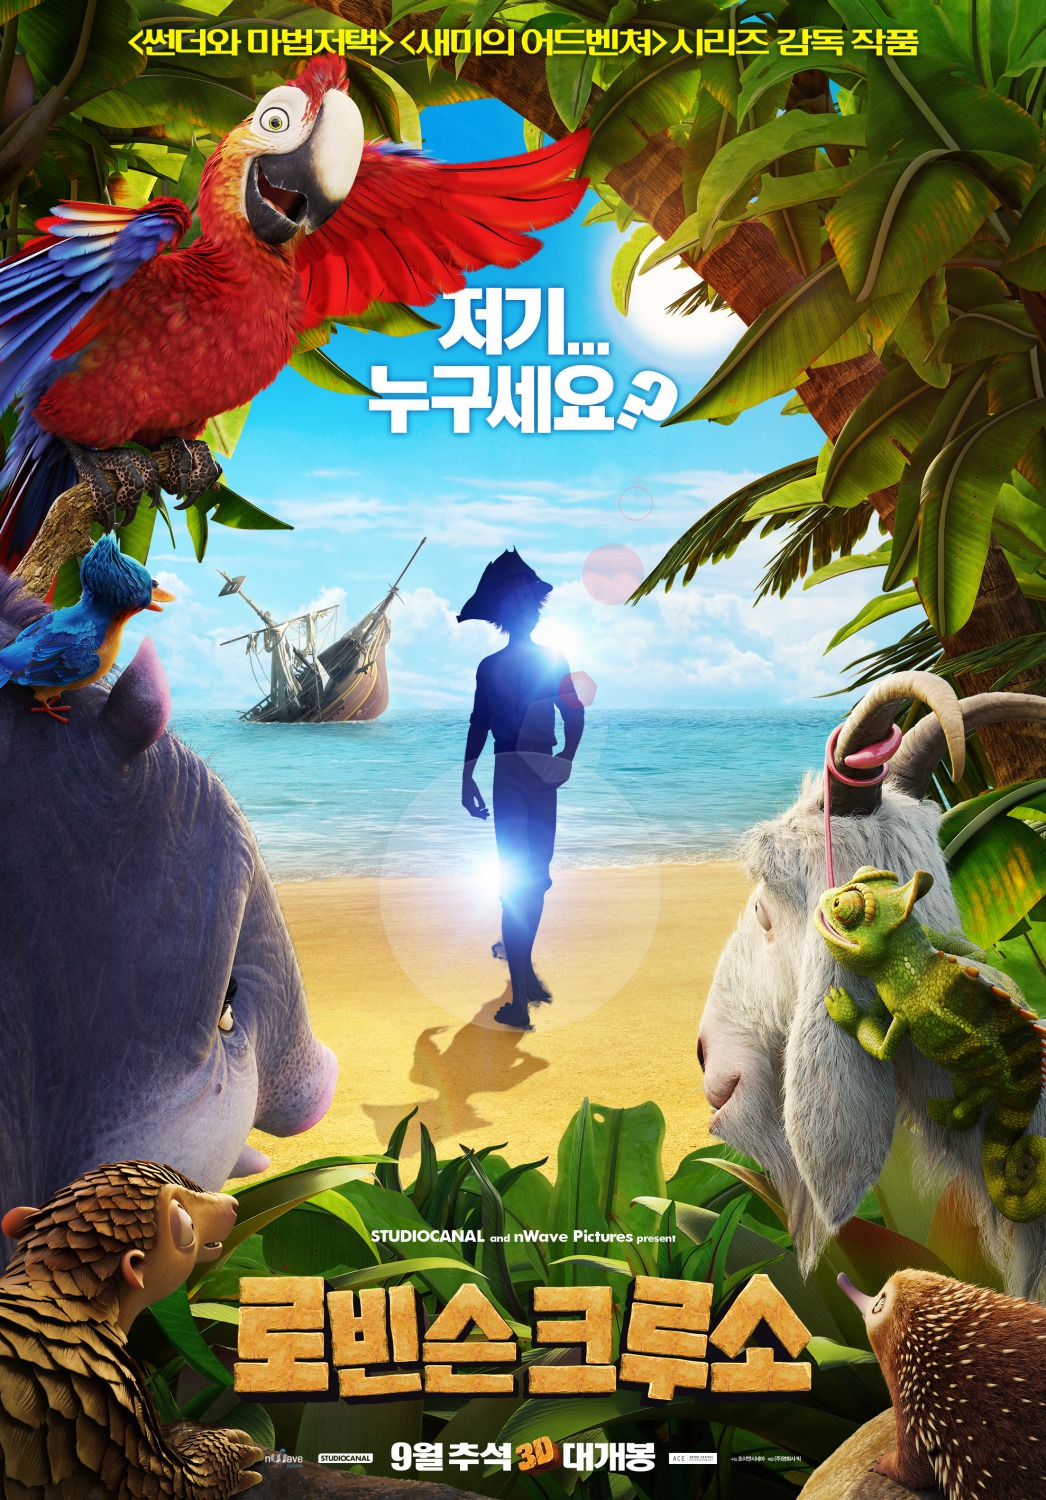 Extra Large Movie Poster Image for Robinson Crusoe (#6 of 13)